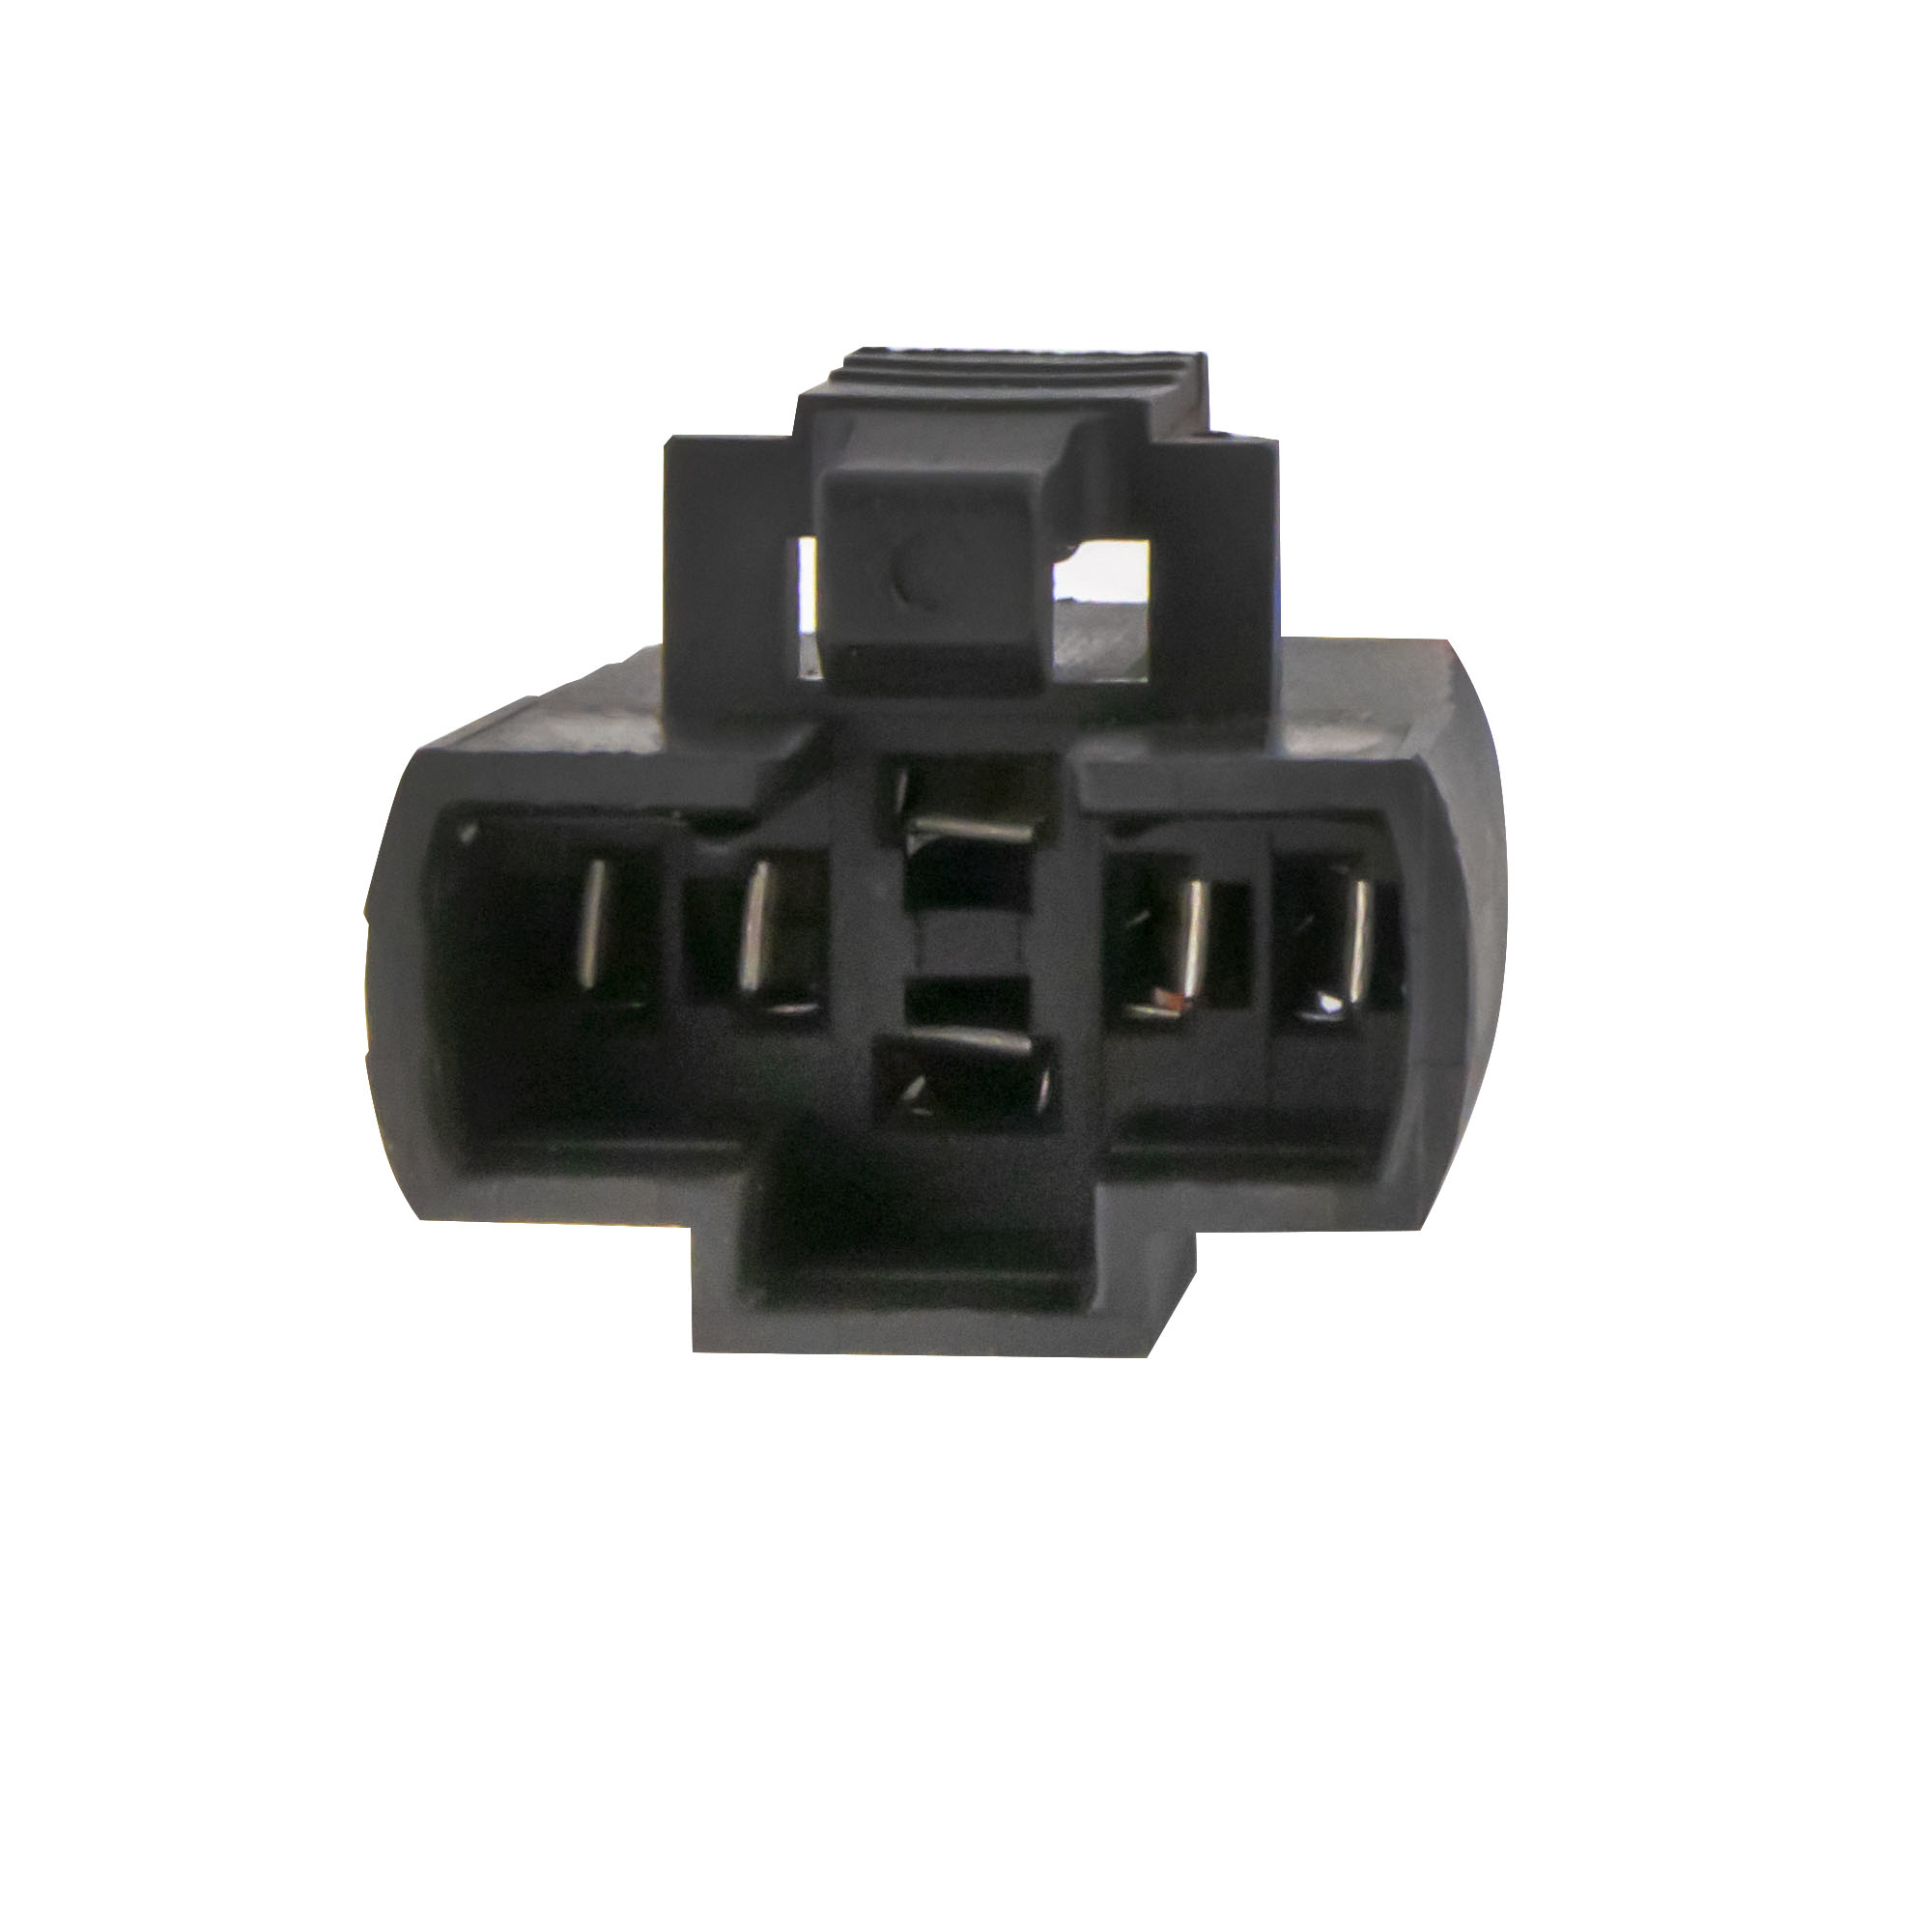 Plug-in connector for Ø22mm Push-button